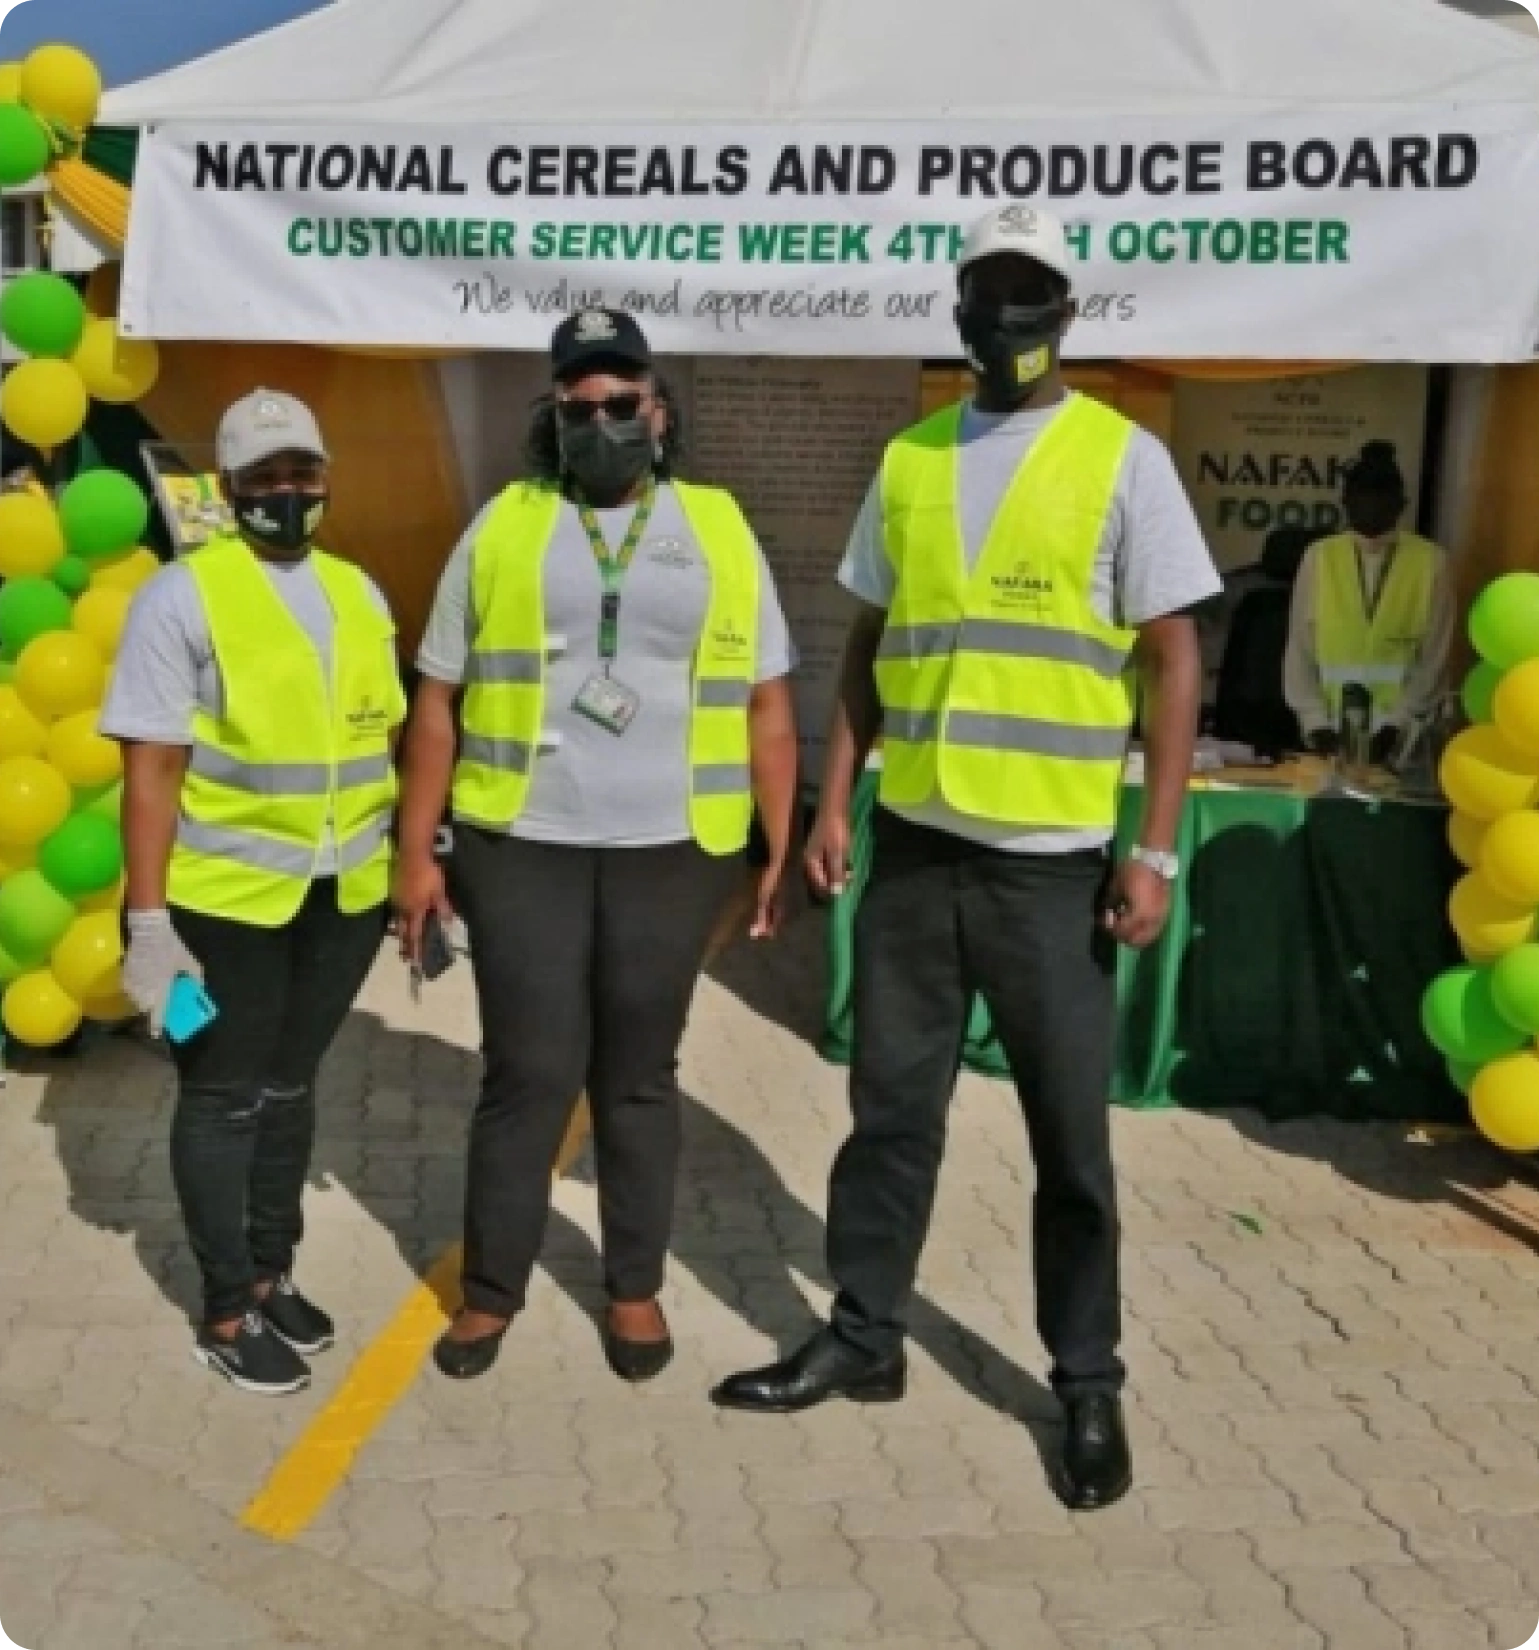 National Cereals & Produce Board